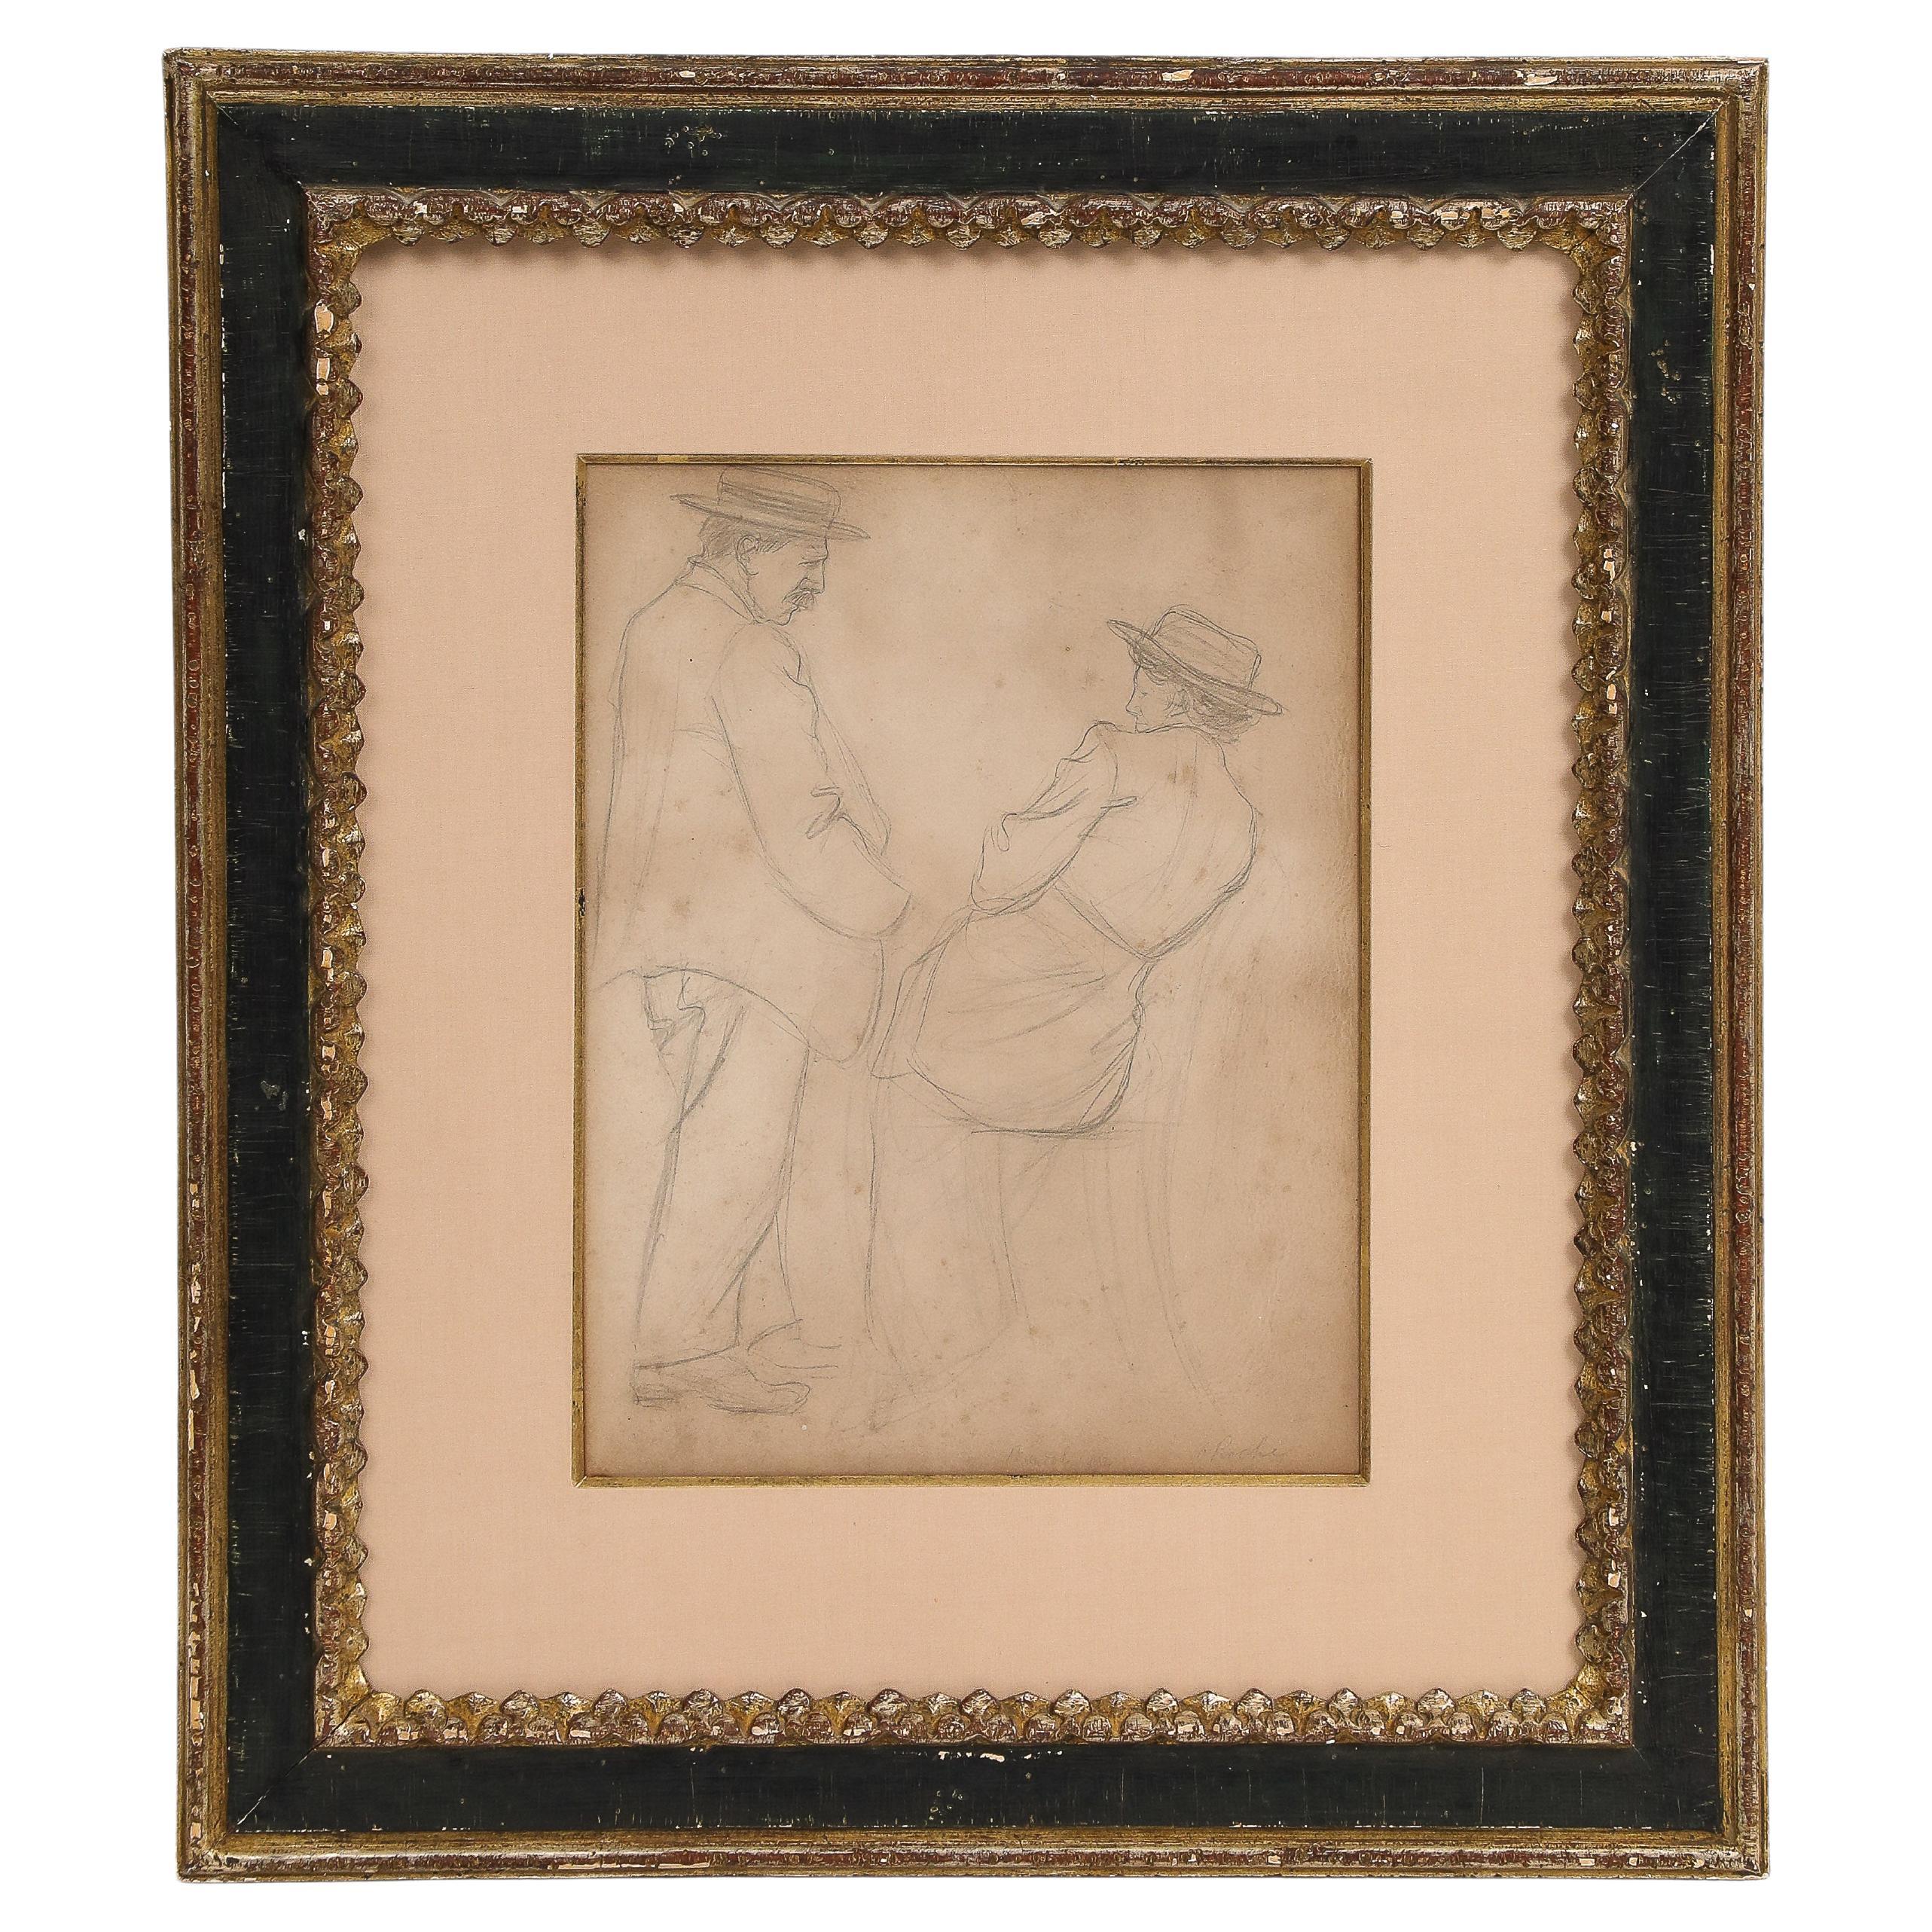 Odilon Roche Signed Drawing on Paper, "Sketch of Couple, Bandol, France", 1934 For Sale